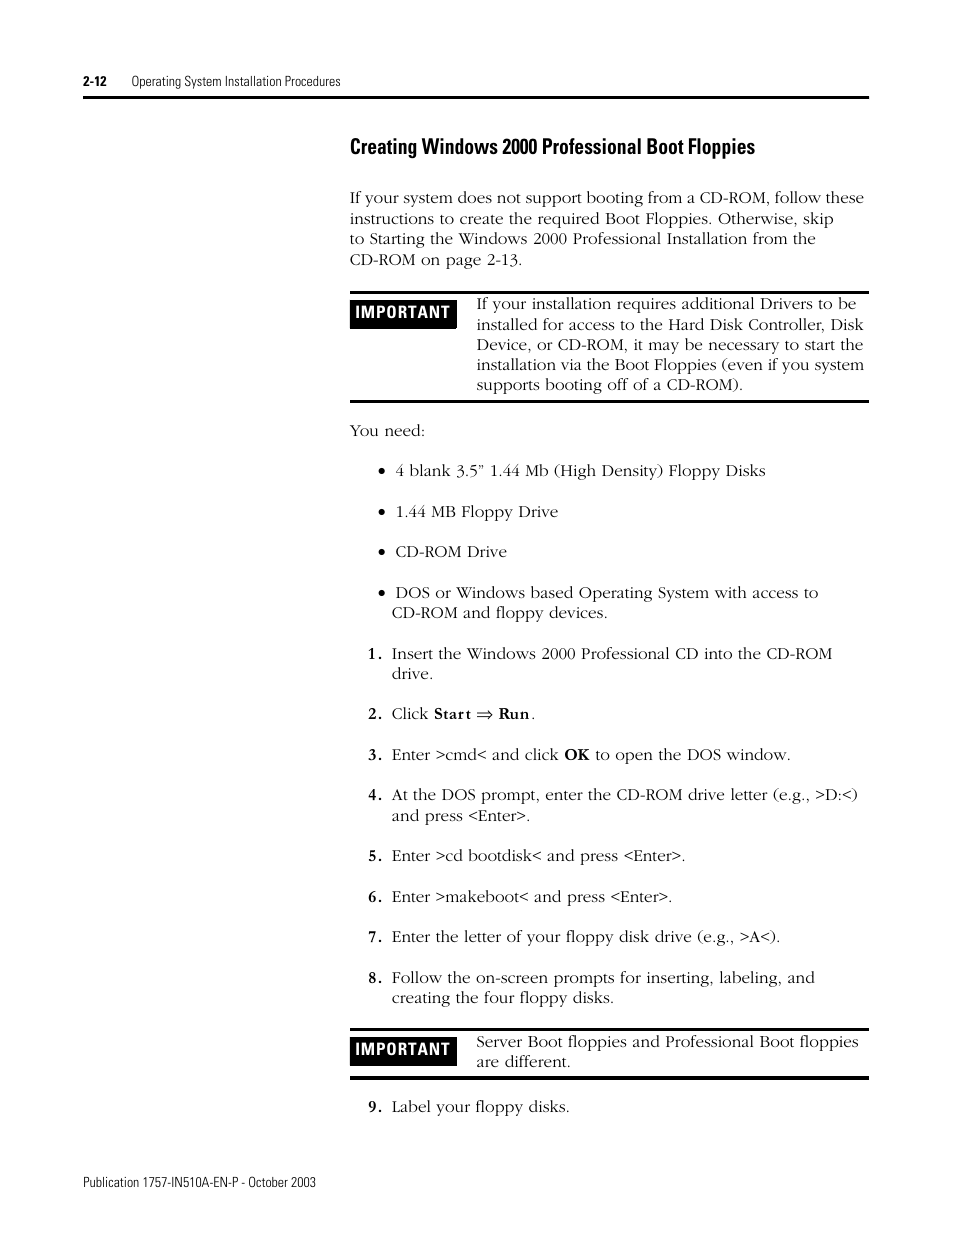 Creating windows 2000 professional boot floppies | Rockwell Automation 1757-SWKIT5100 ProcessLogix R510.0 Installation and Upgrade Guide User Manual | Page 32 / 271